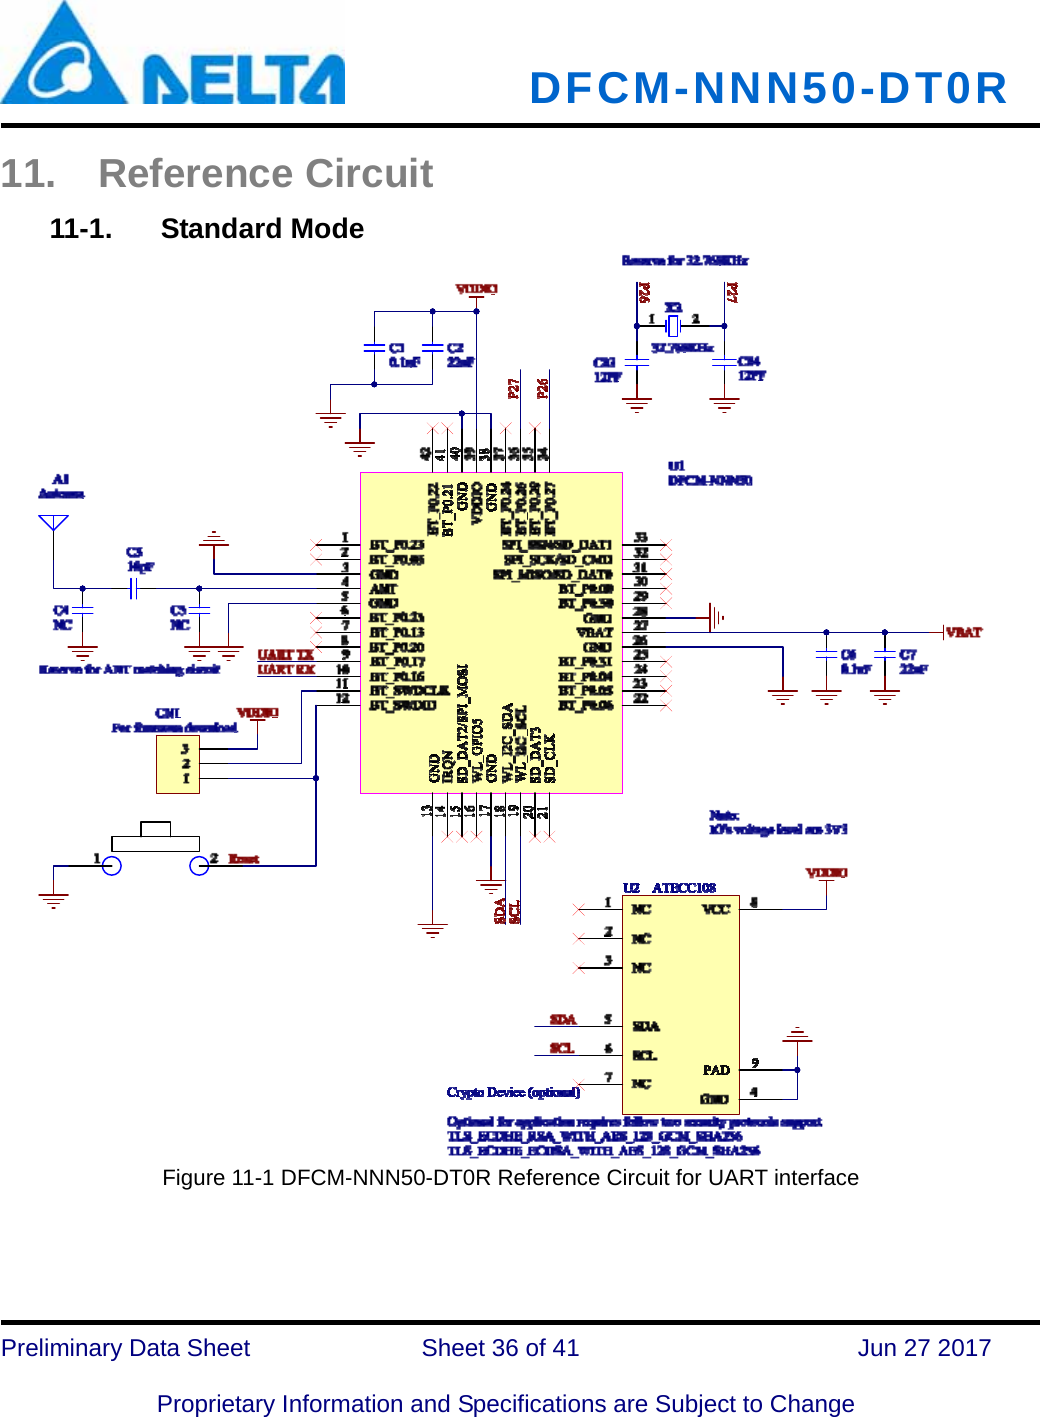   DFCM-NNN50-DT0R   Preliminary Data Sheet              Sheet 36 of 41      Jun 27 2017  Proprietary Information and Specifications are Subject to Change 11. Reference Circuit 11-1.  Standard Mode  Figure 11-1 DFCM-NNN50-DT0R Reference Circuit for UART interface     